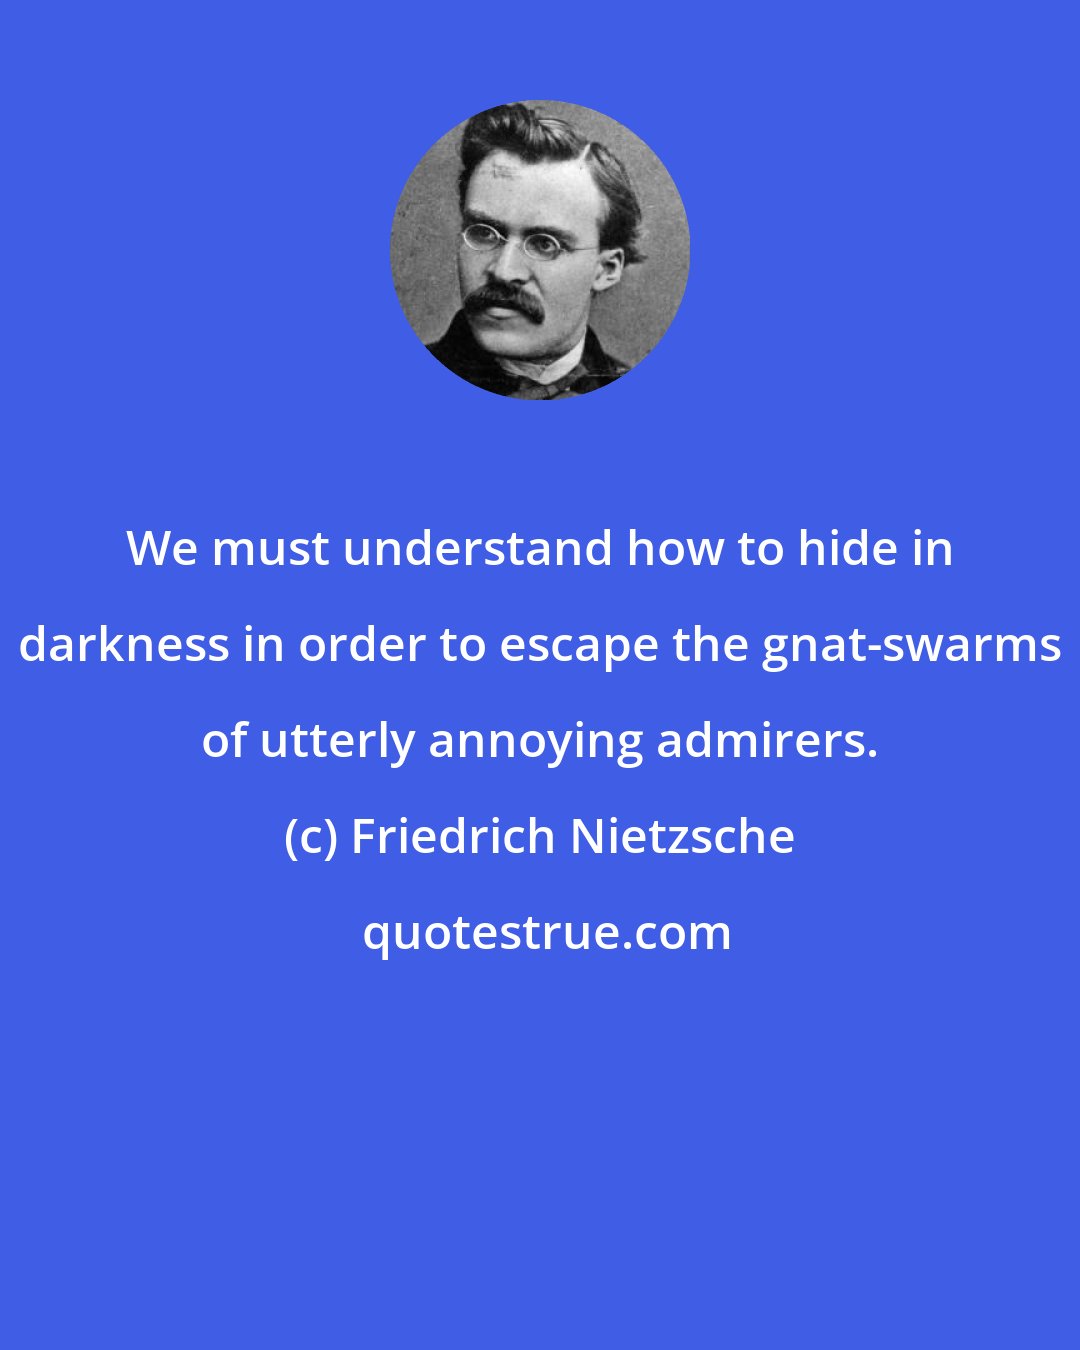 Friedrich Nietzsche: We must understand how to hide in darkness in order to escape the gnat-swarms of utterly annoying admirers.